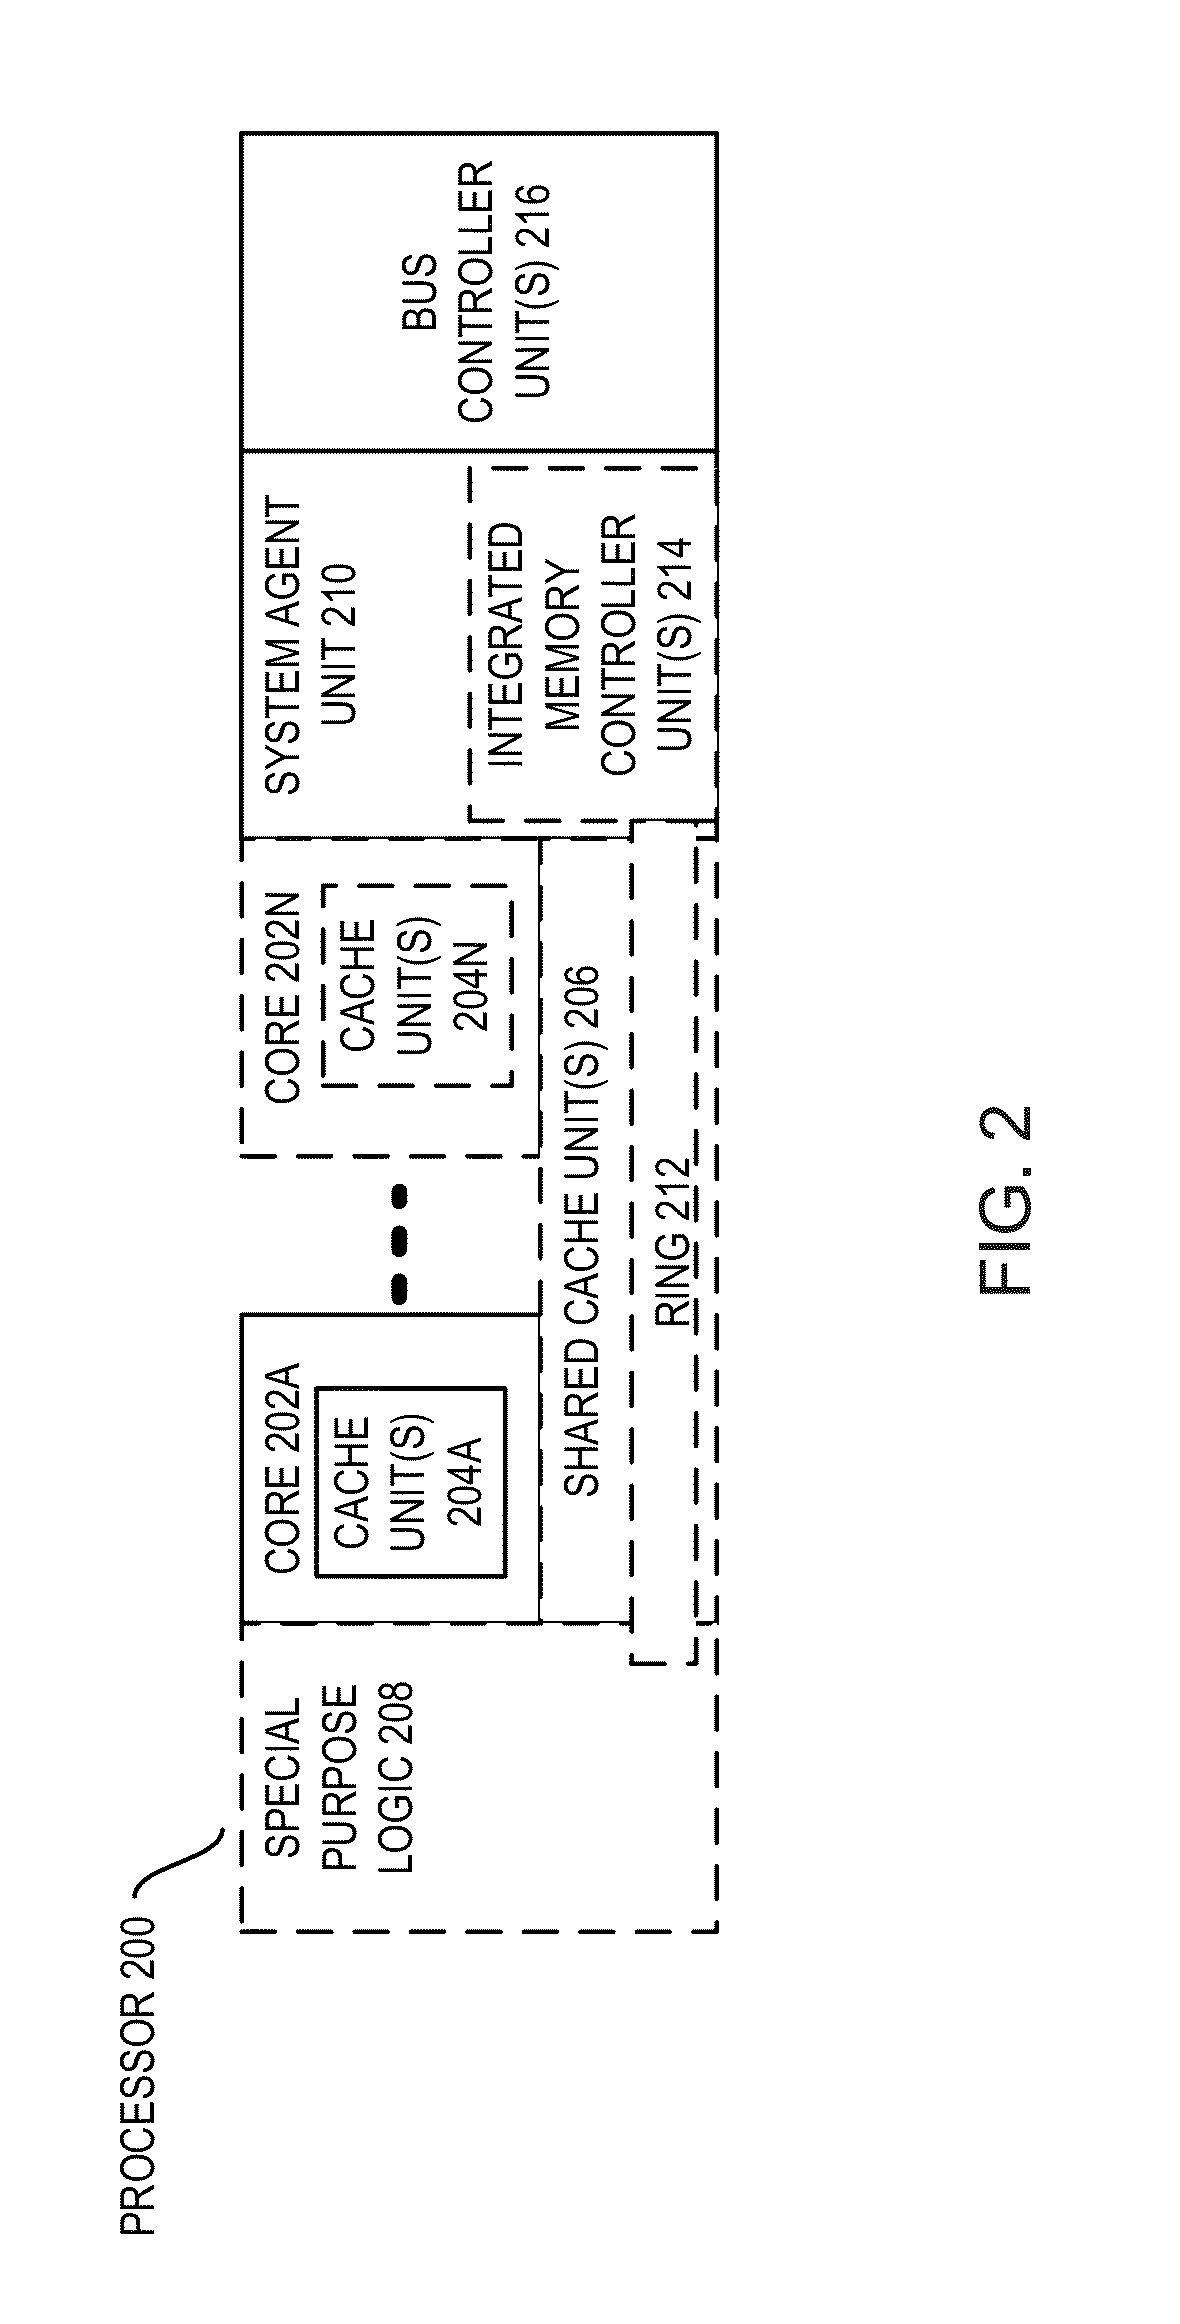 Fault tolerant apparatus and method for elliptic curve cryptography